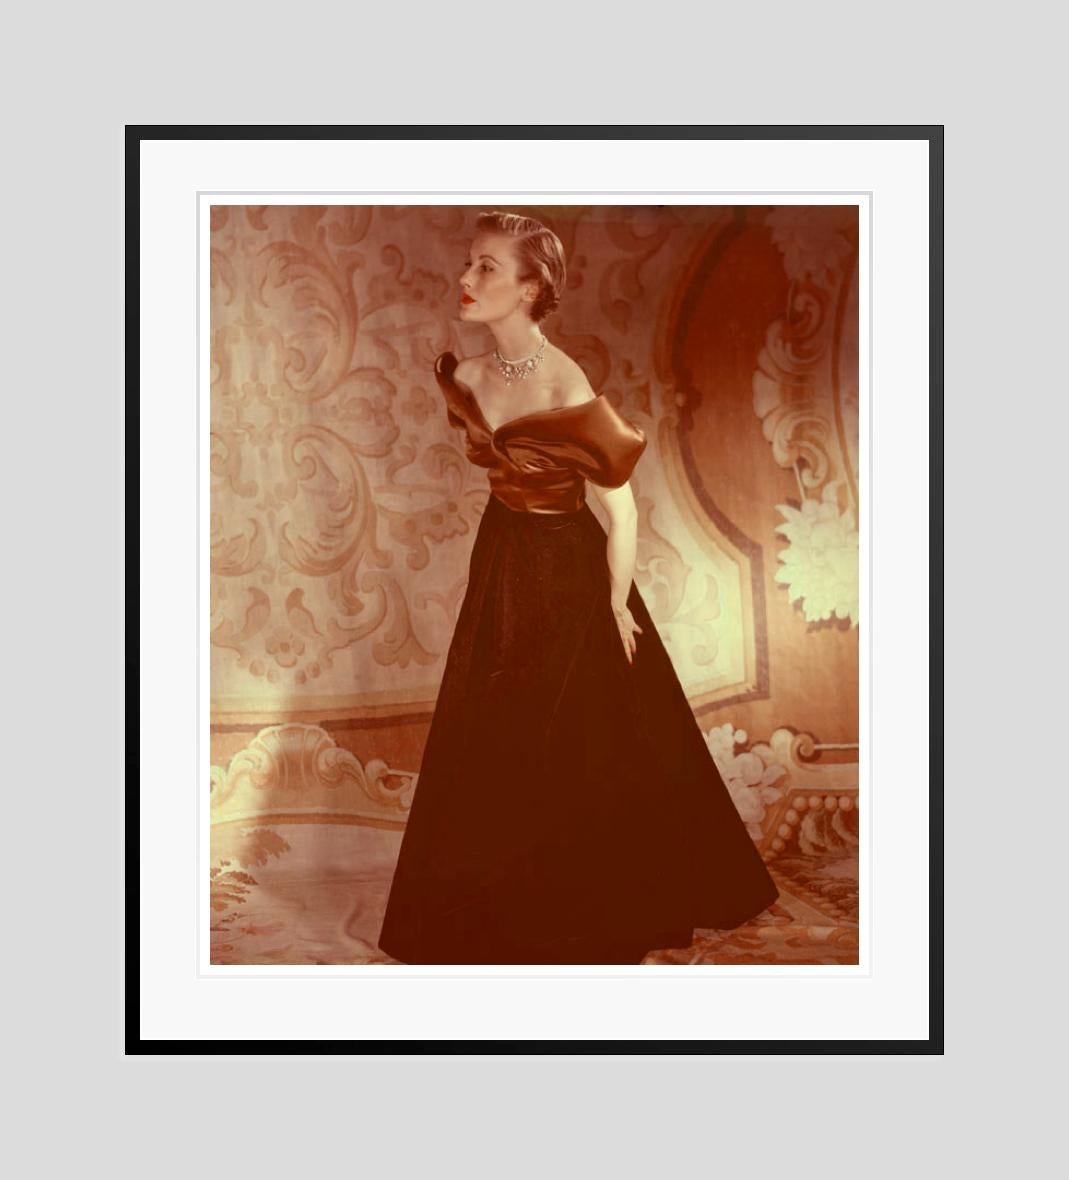 Evening Gown 

1948

Fashion shoot featuring a model in an evening gown

by Toni Frissell

40 x 30